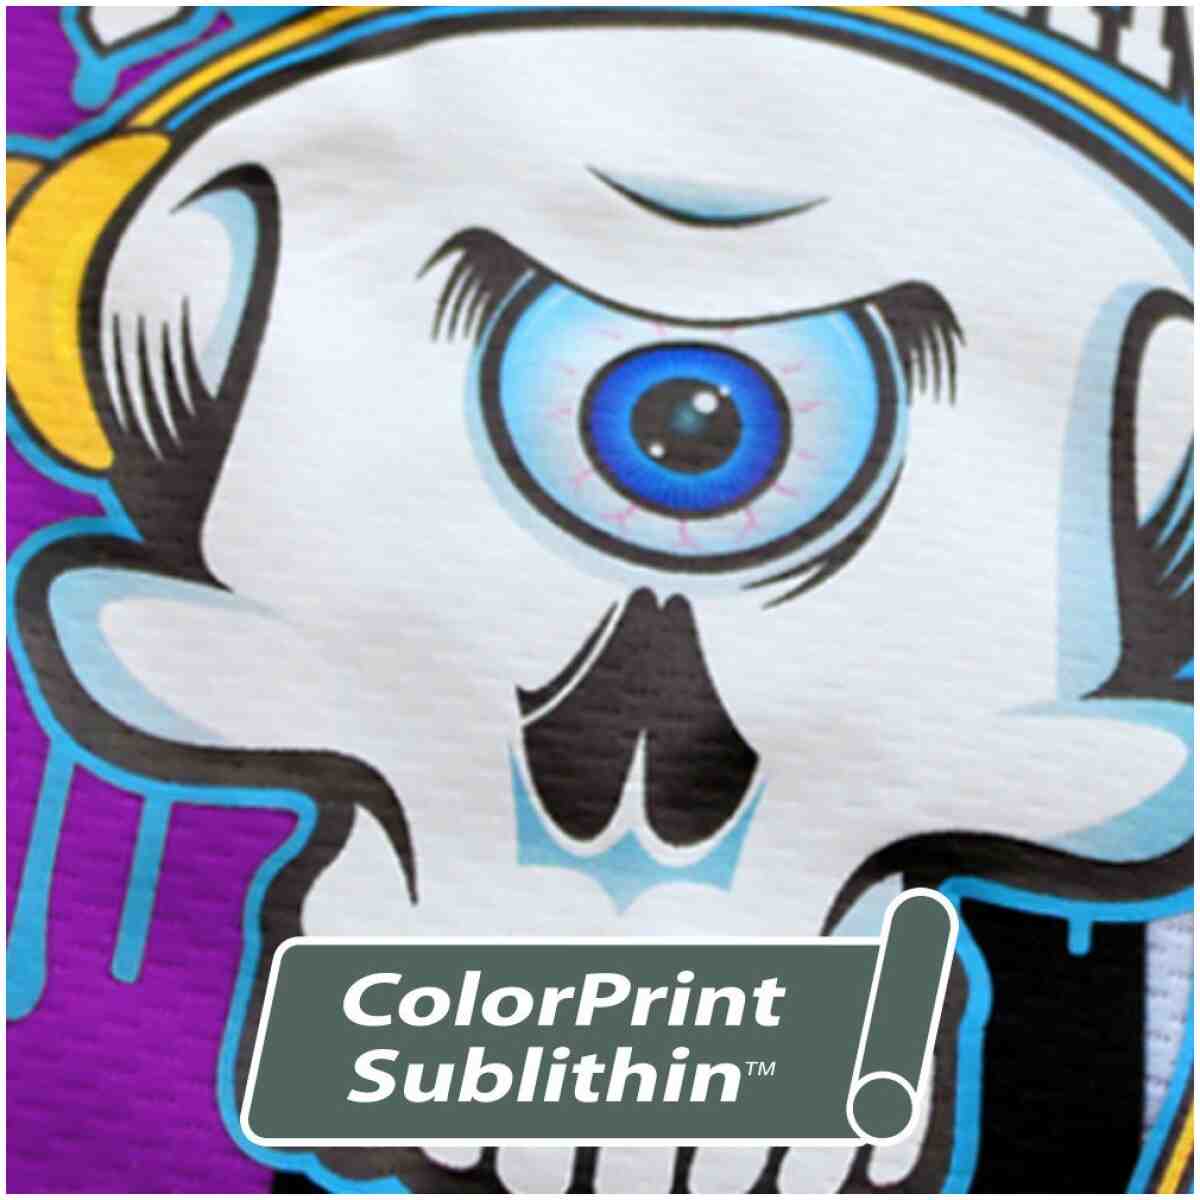 Colorprint™ Sublithin 20" Wide SISER®